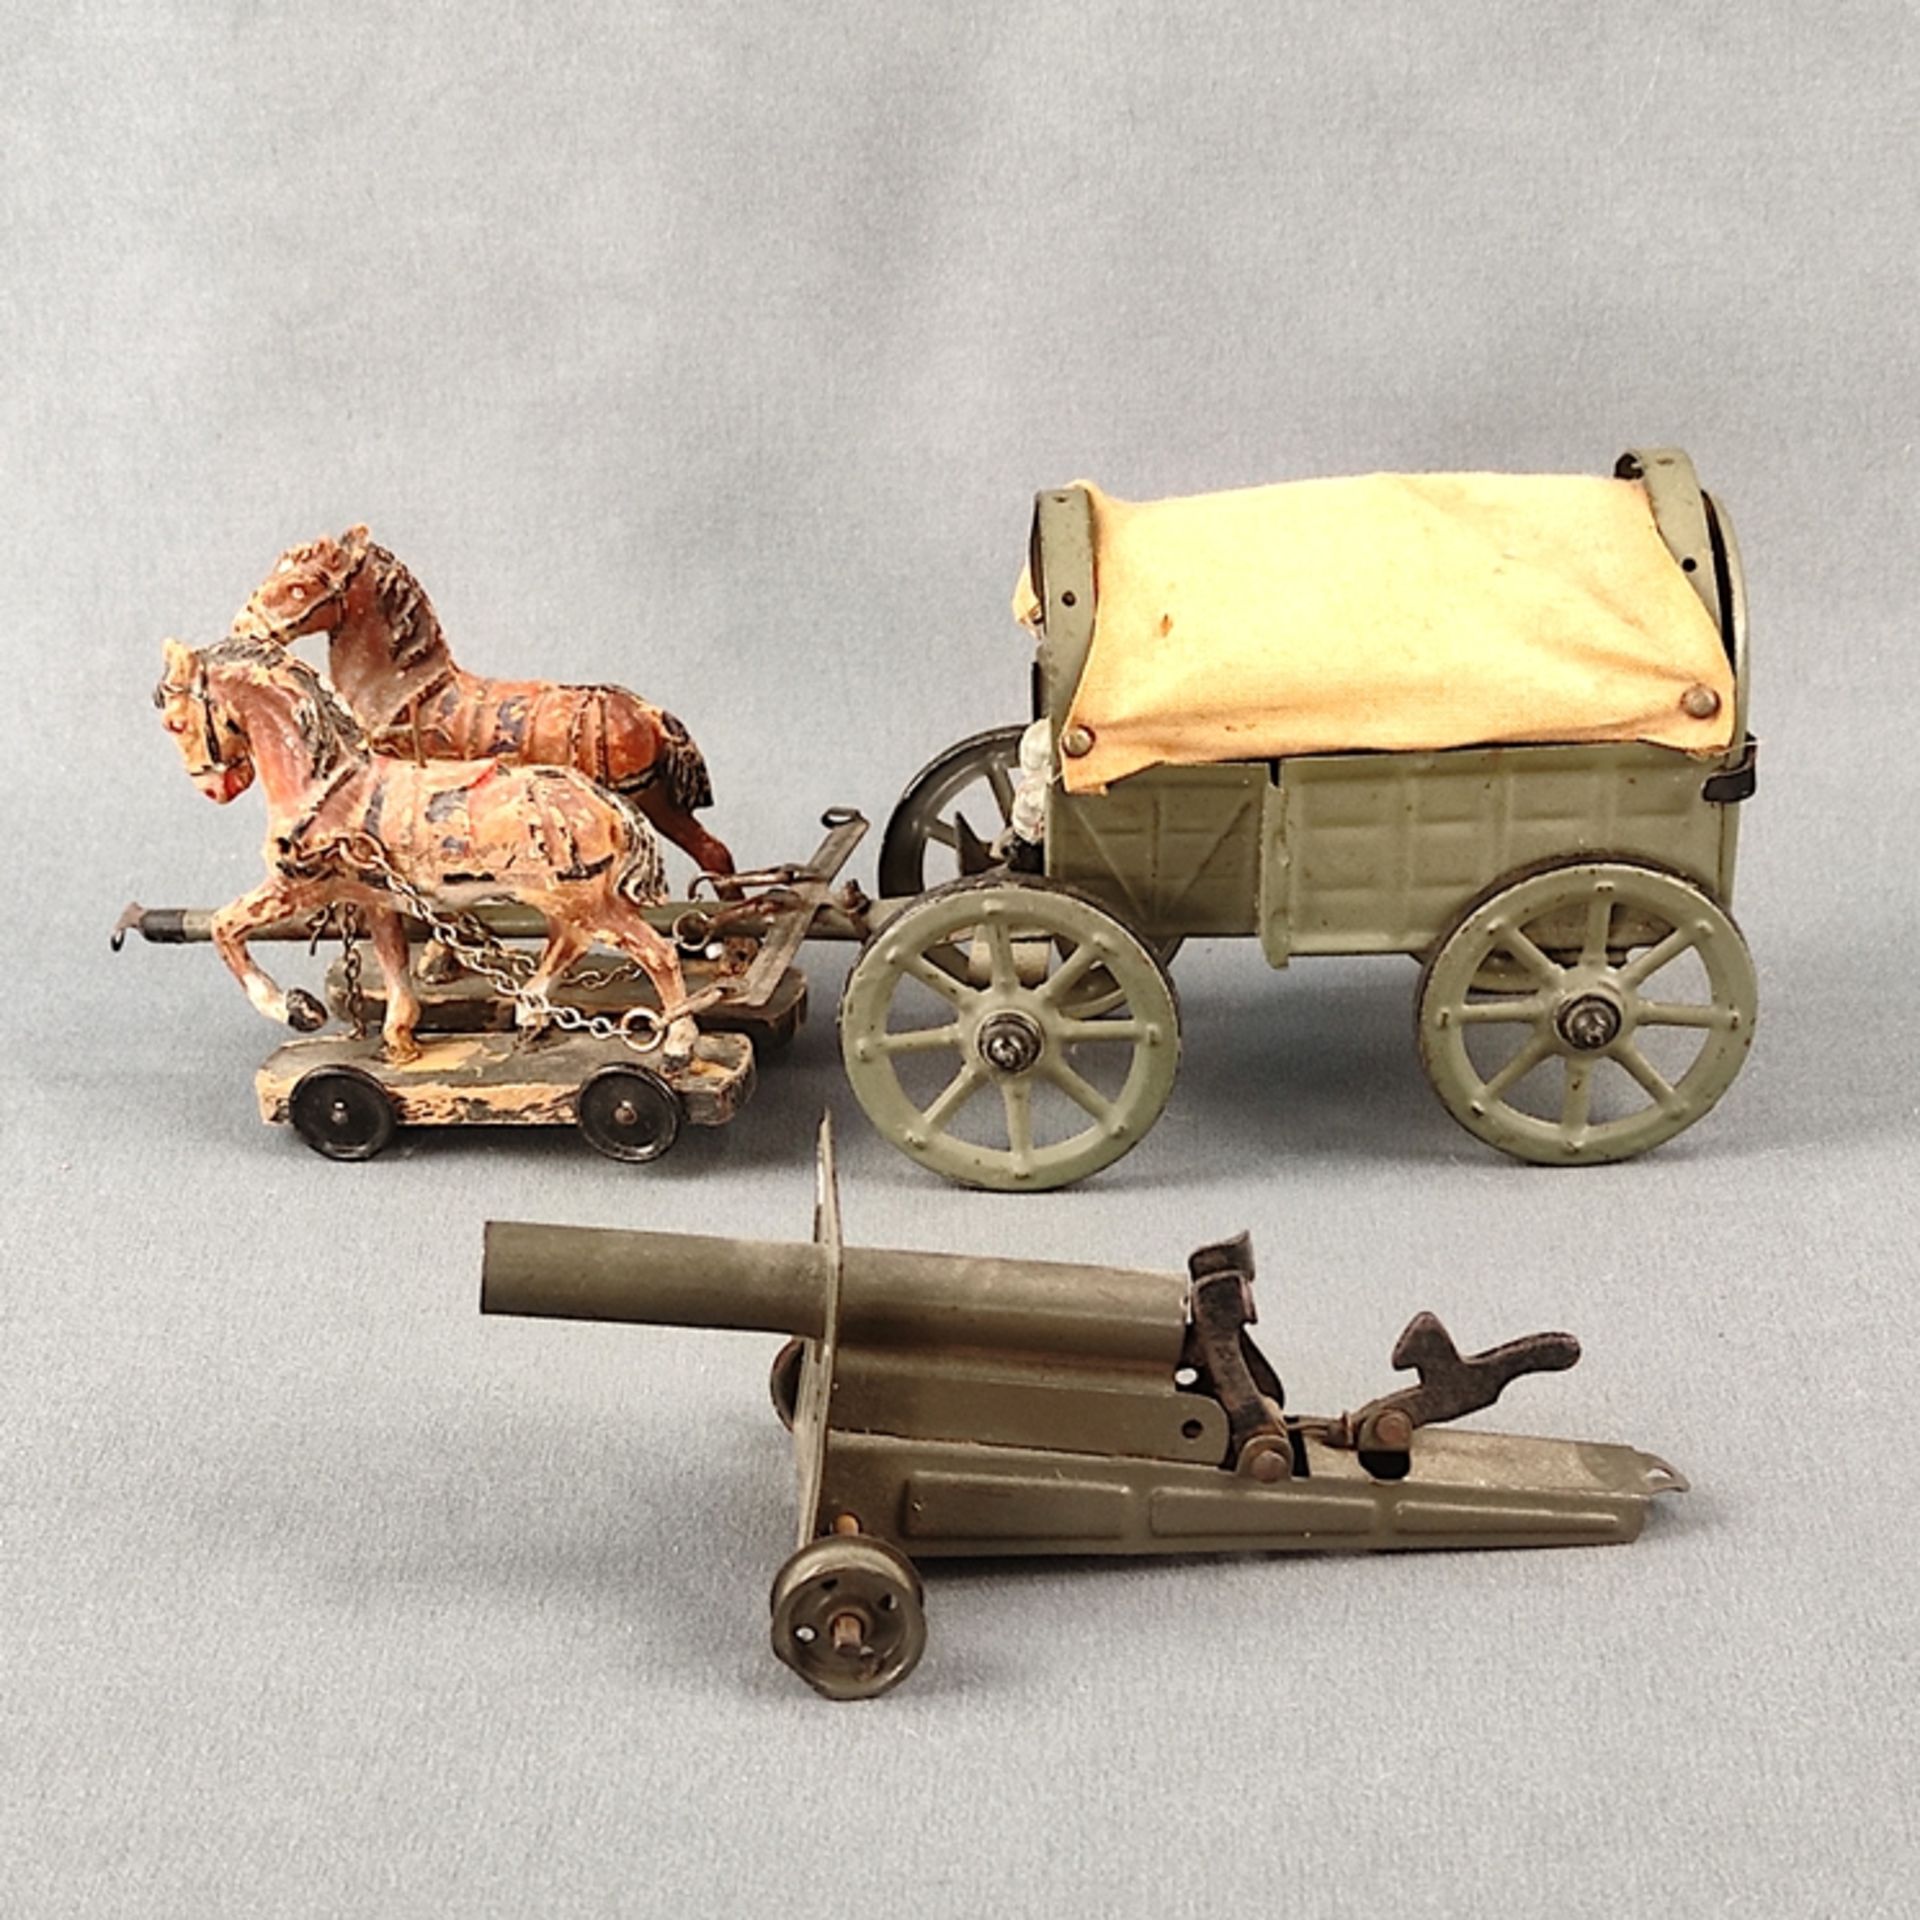 Covered wagon 2-horse with 2 riders (one without head), sheet metal version, 9x21x6cm, enclosed a I